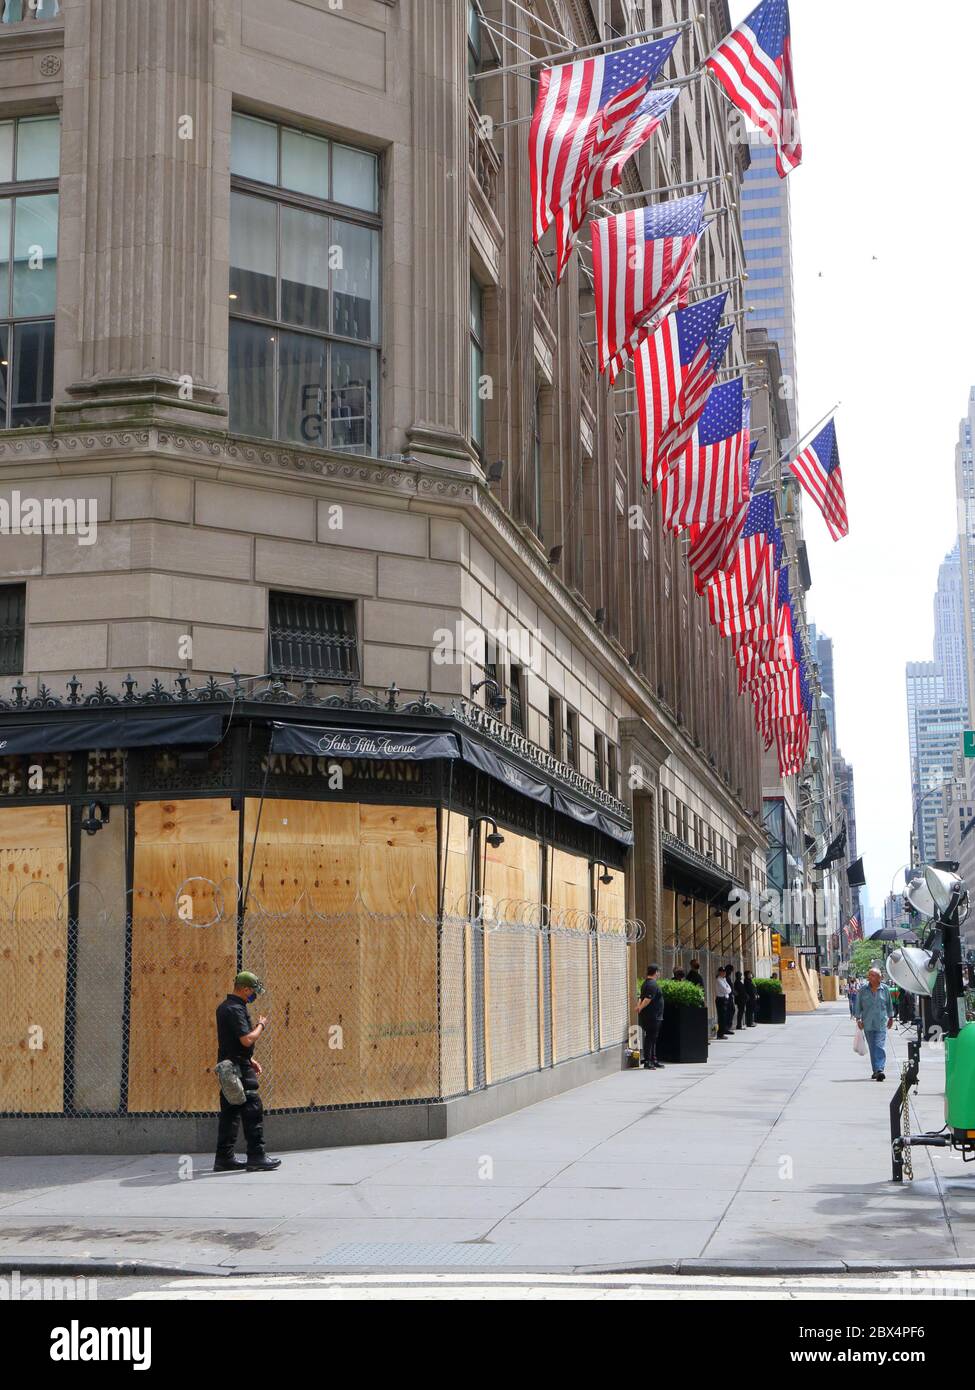 New York, NY. 3rd June 2020. The flagship Saks Fifth Avenue department store with boarded up windows, barbed wire, and American flags in response to a recent spate of large scale, organized burglaries/looting in various parts of the city. The barbed wire and private security appears to send an almost dystopian, and tone deaf message to the citizens of New York that all hope is lost.  On the flip side, it is an immensely Instagrammable photo op. The department store has been closed during the COVID-19 coronavirus crisis. Stock Photo